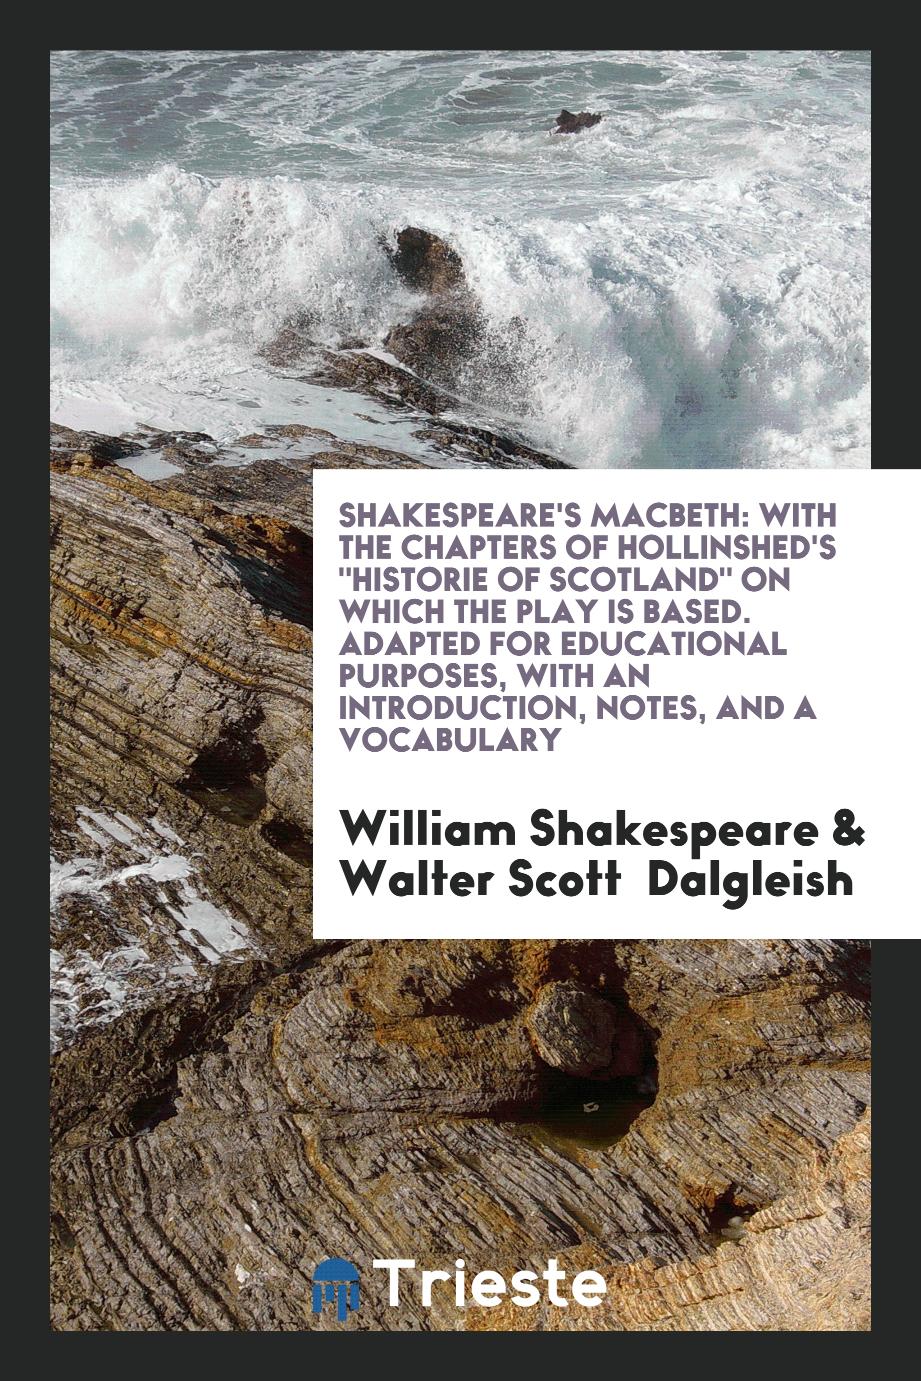 Shakespeare's Macbeth: With the Chapters of Hollinshed's "Historie of Scotland" on Which the Play Is Based. Adapted for Educational Purposes, with an Introduction, Notes, and a Vocabulary